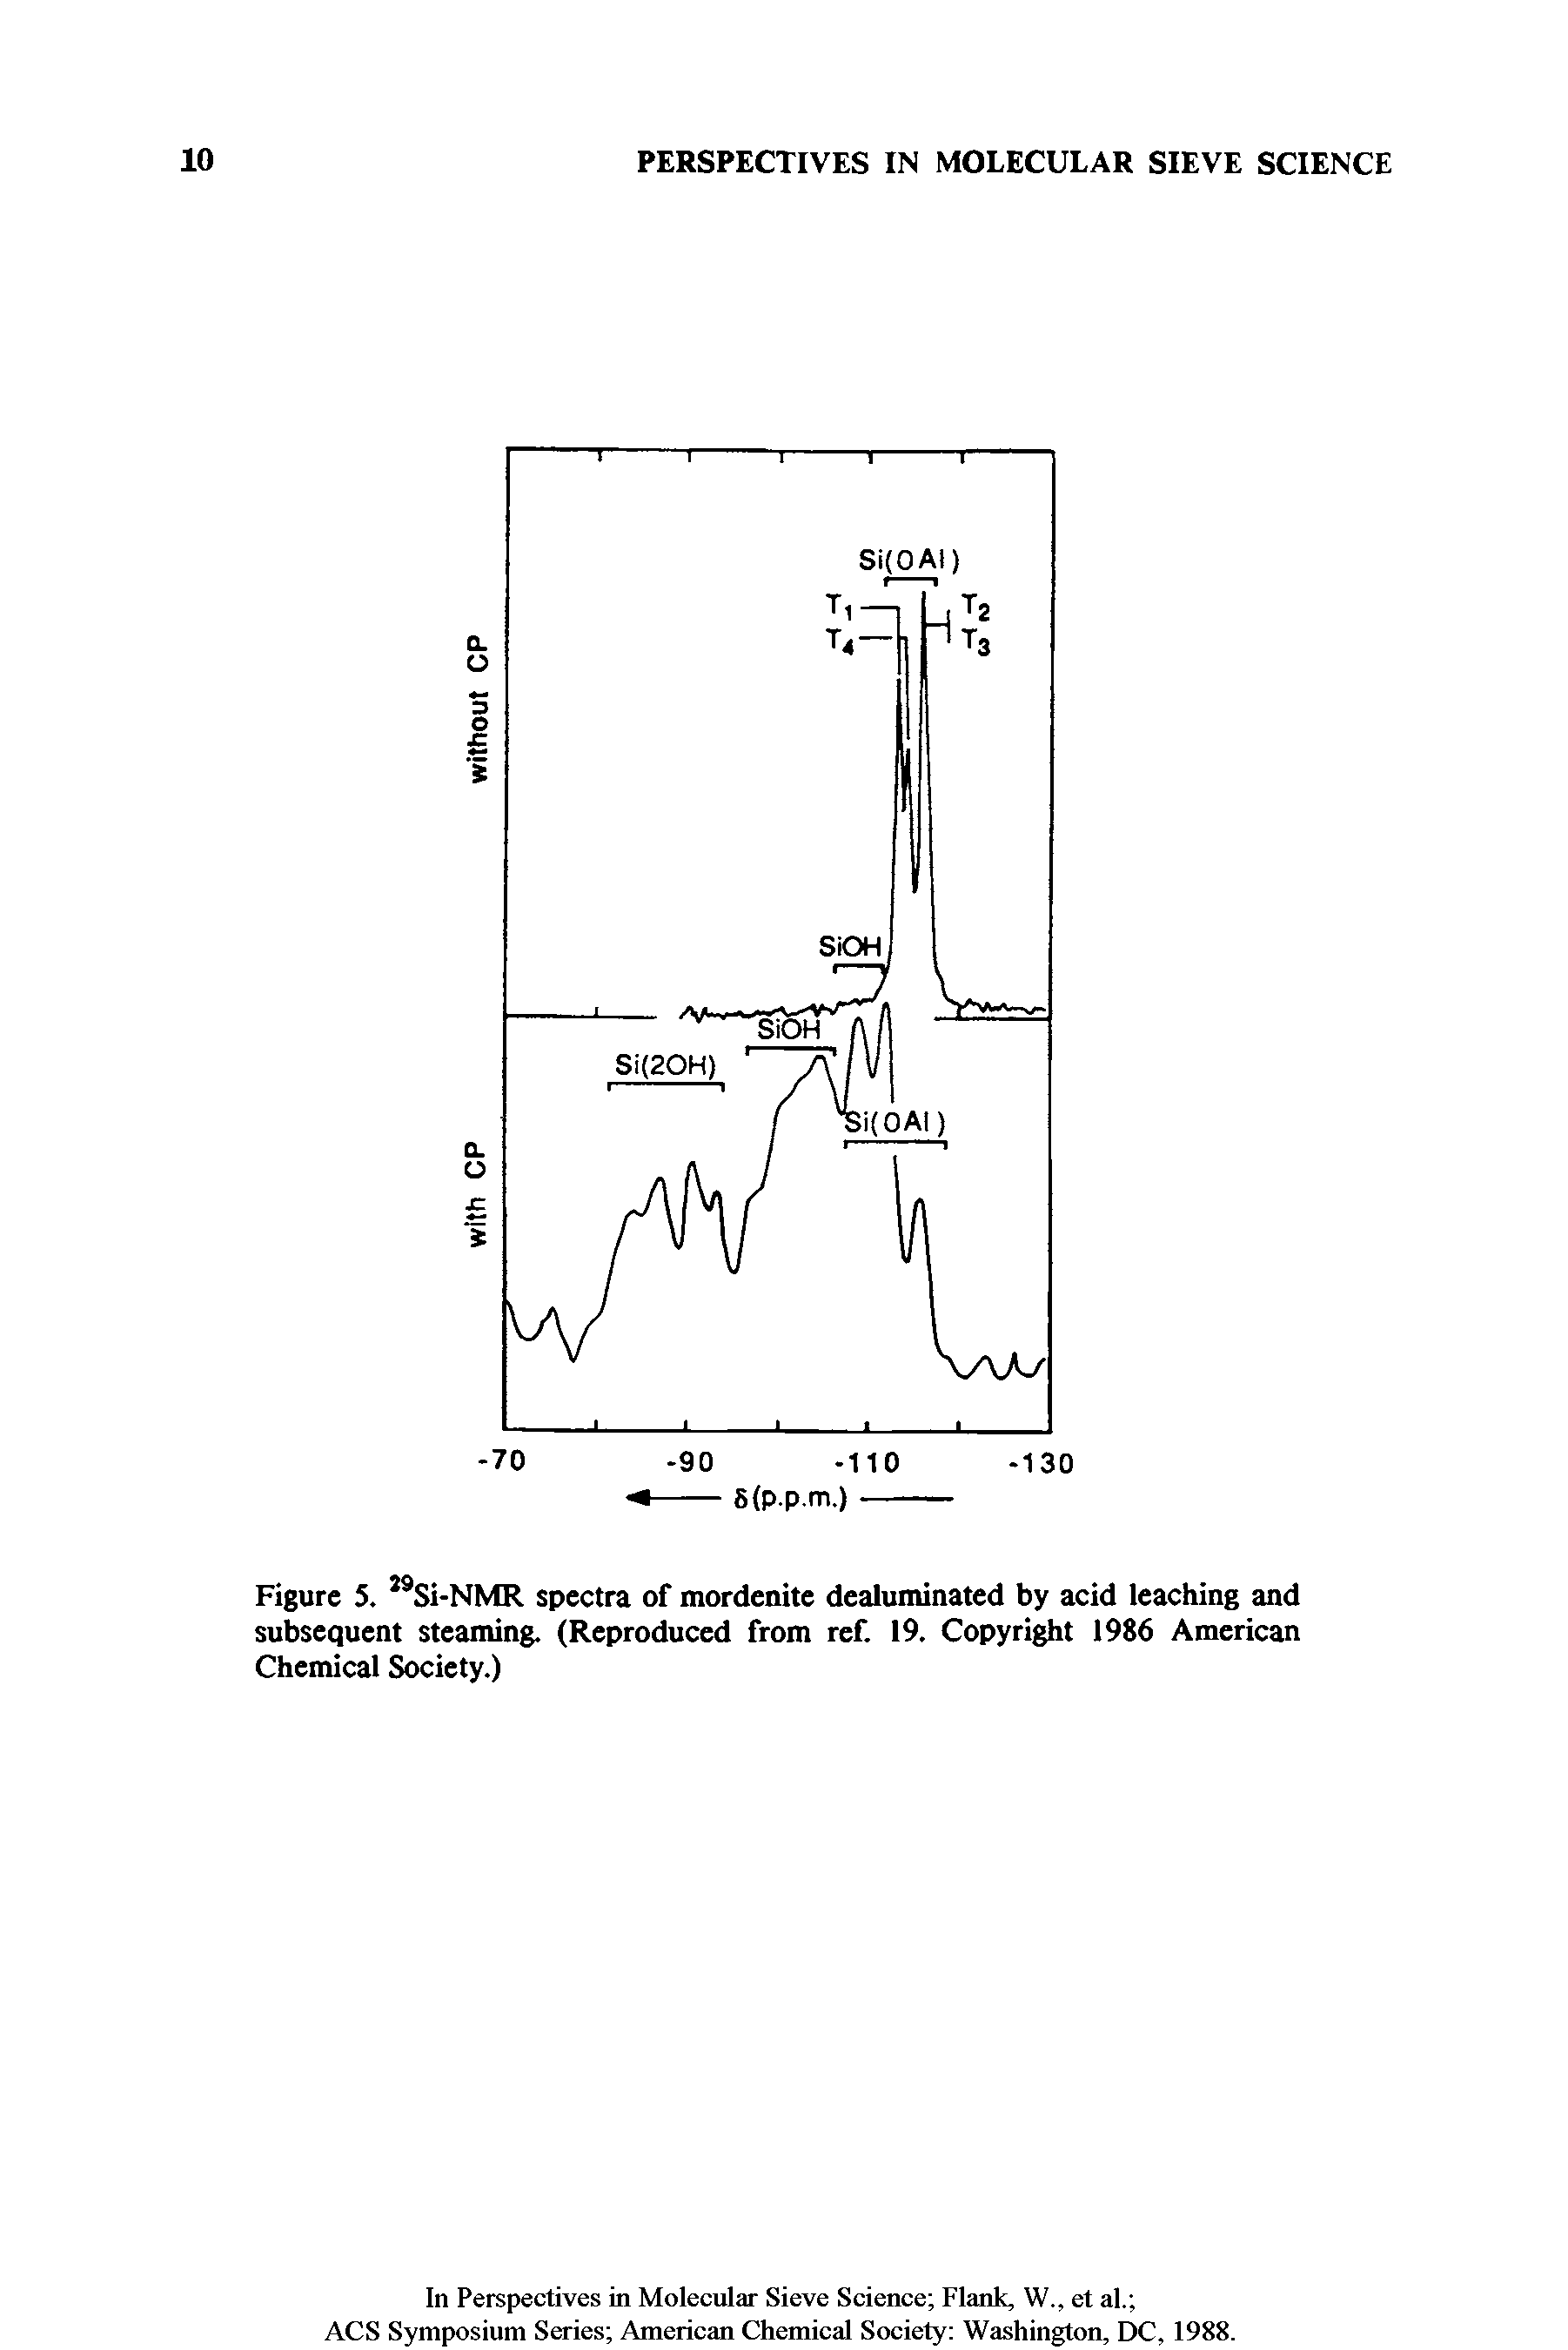 Figure 5. J9Si-NMR spectra of mordenite dealuminated by acid leaching and subsequent steaming. (Reproduced from ref. 19. Copyright 1986 American Chemical Society.)...